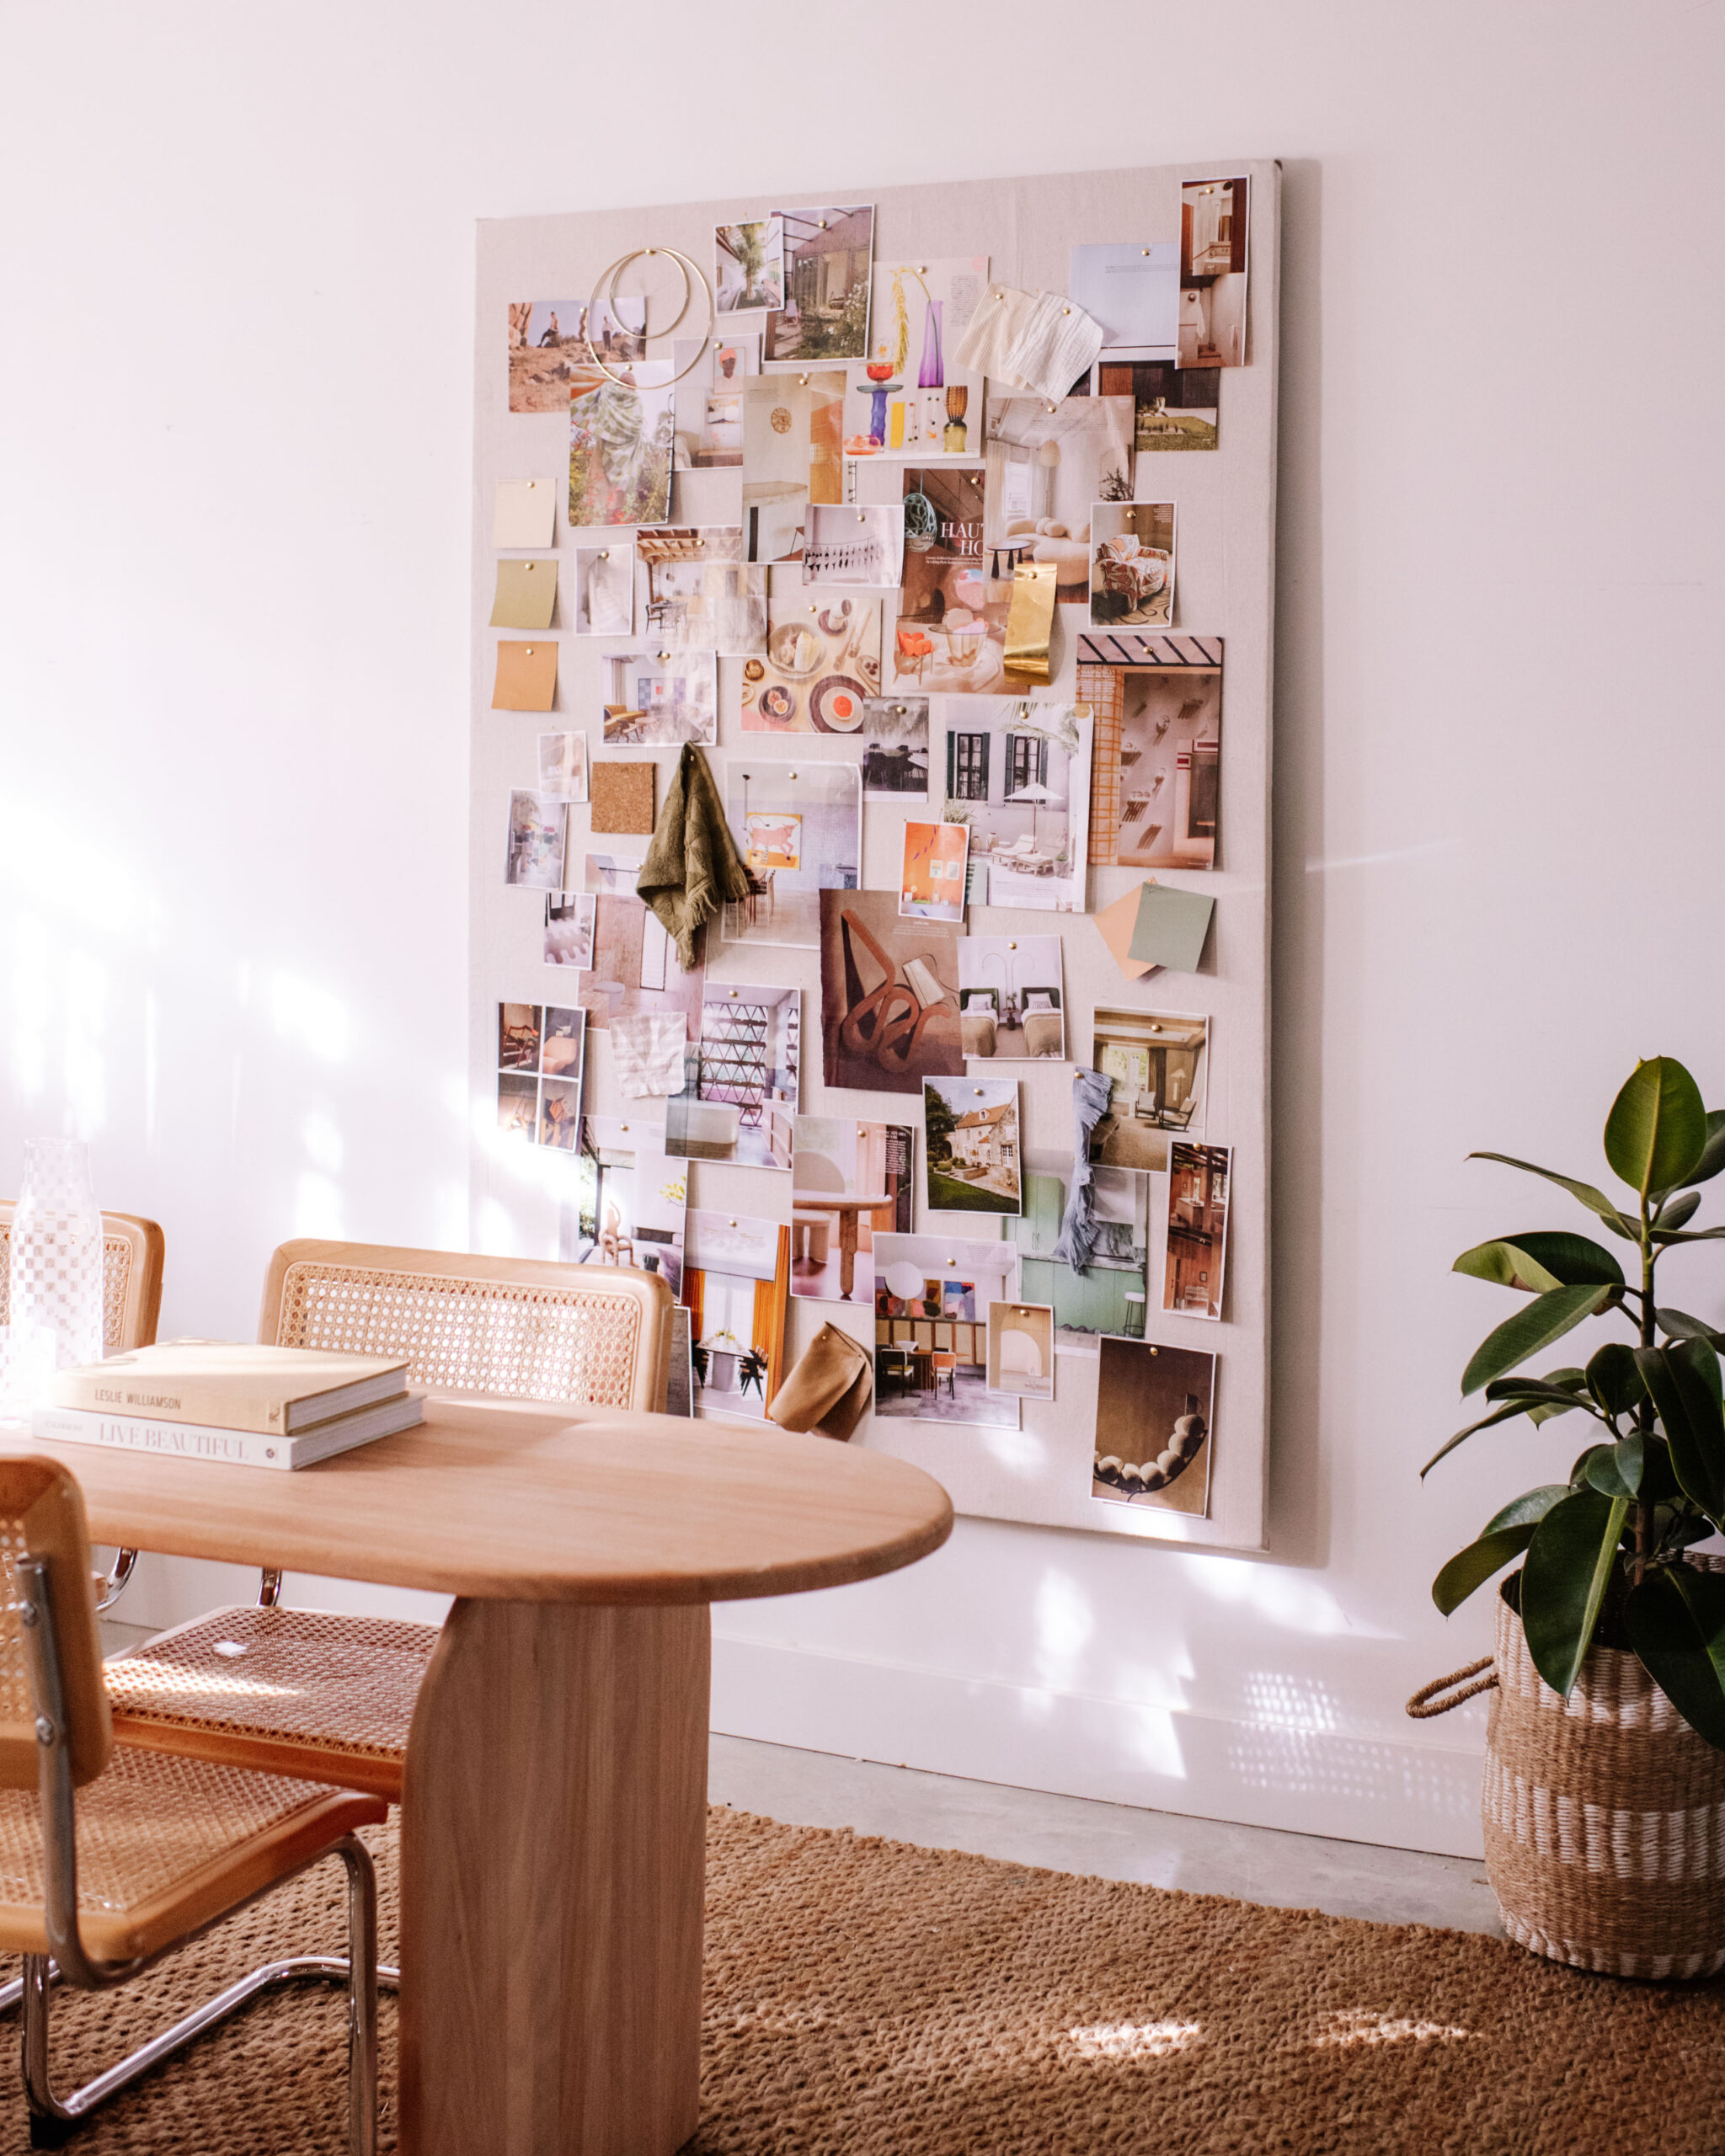 How to Make a Giant Inspiration Pin Board